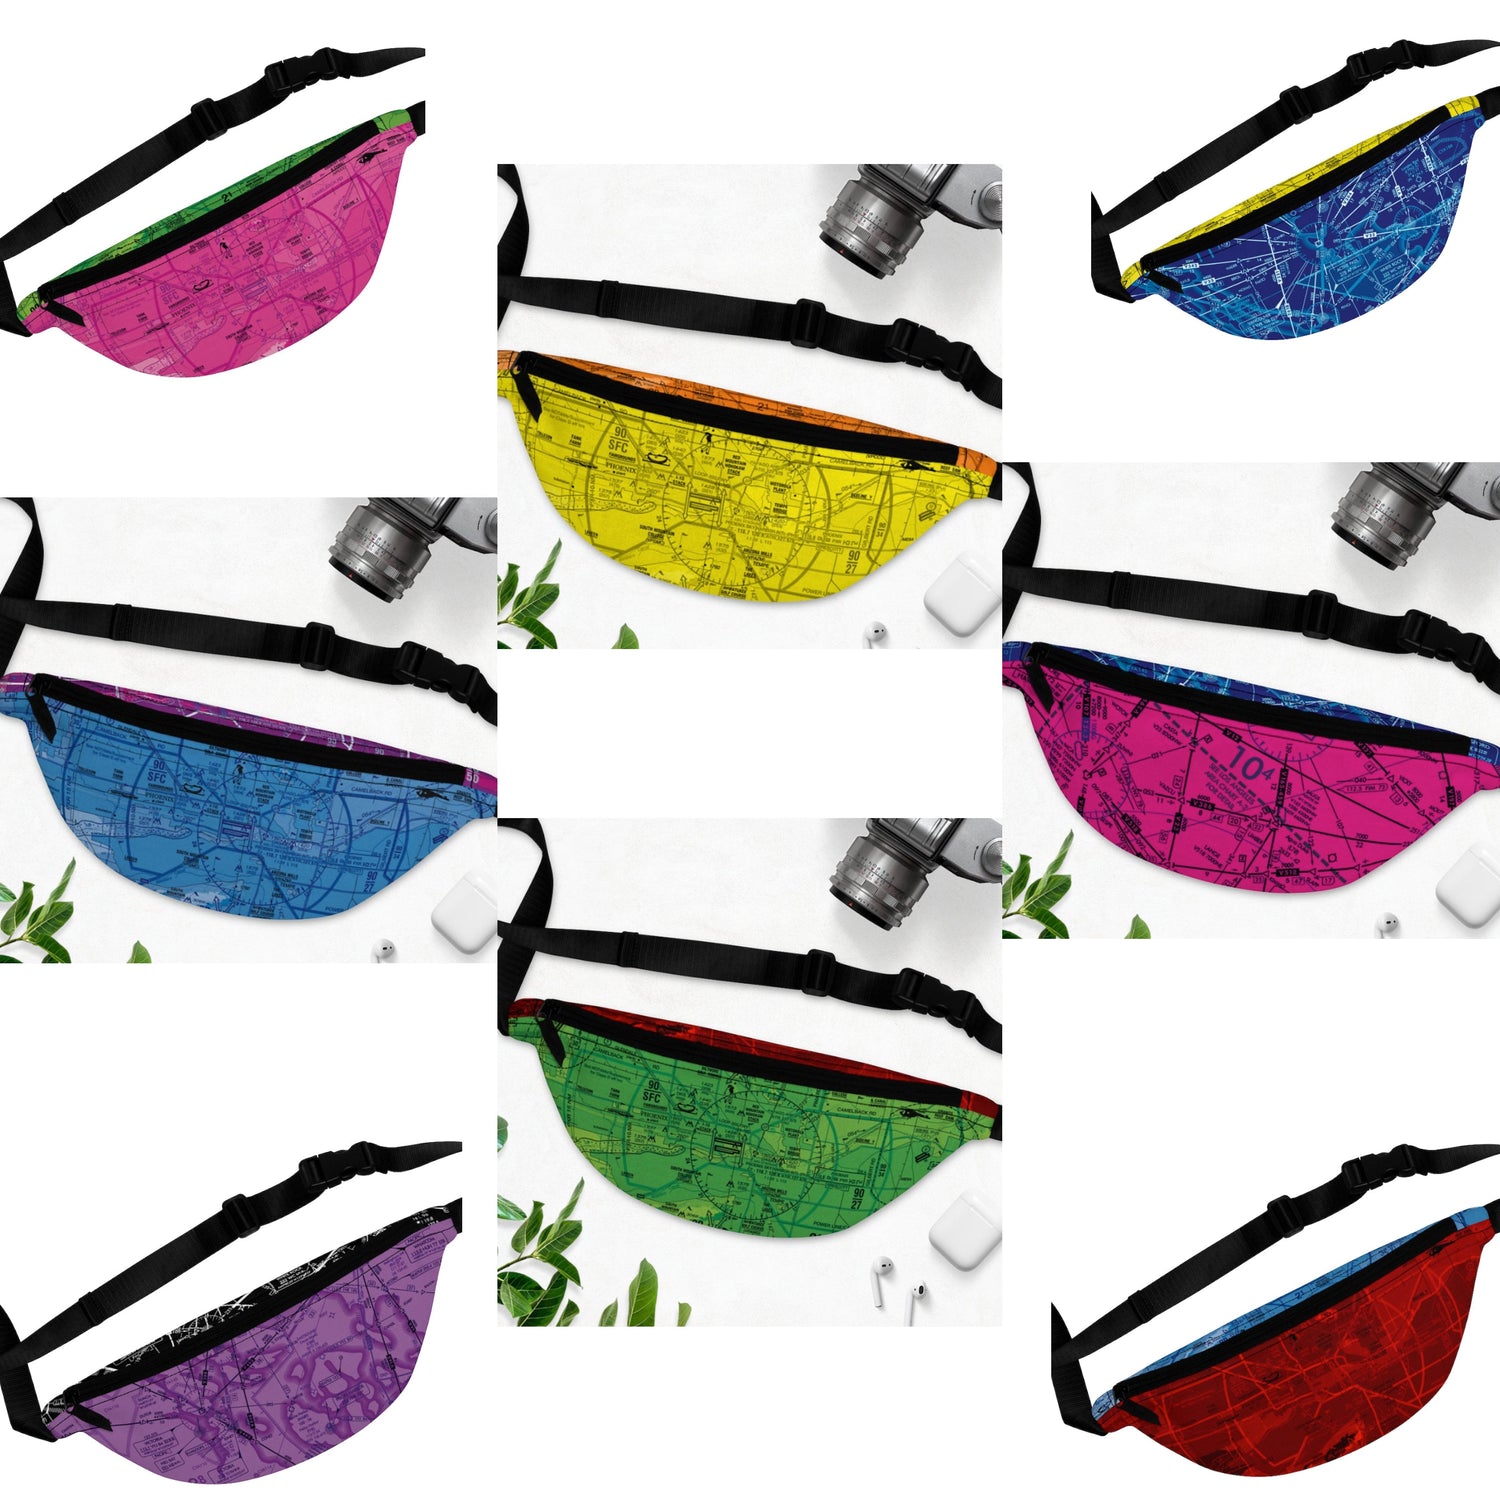 Aviation themed colorful fanny packs